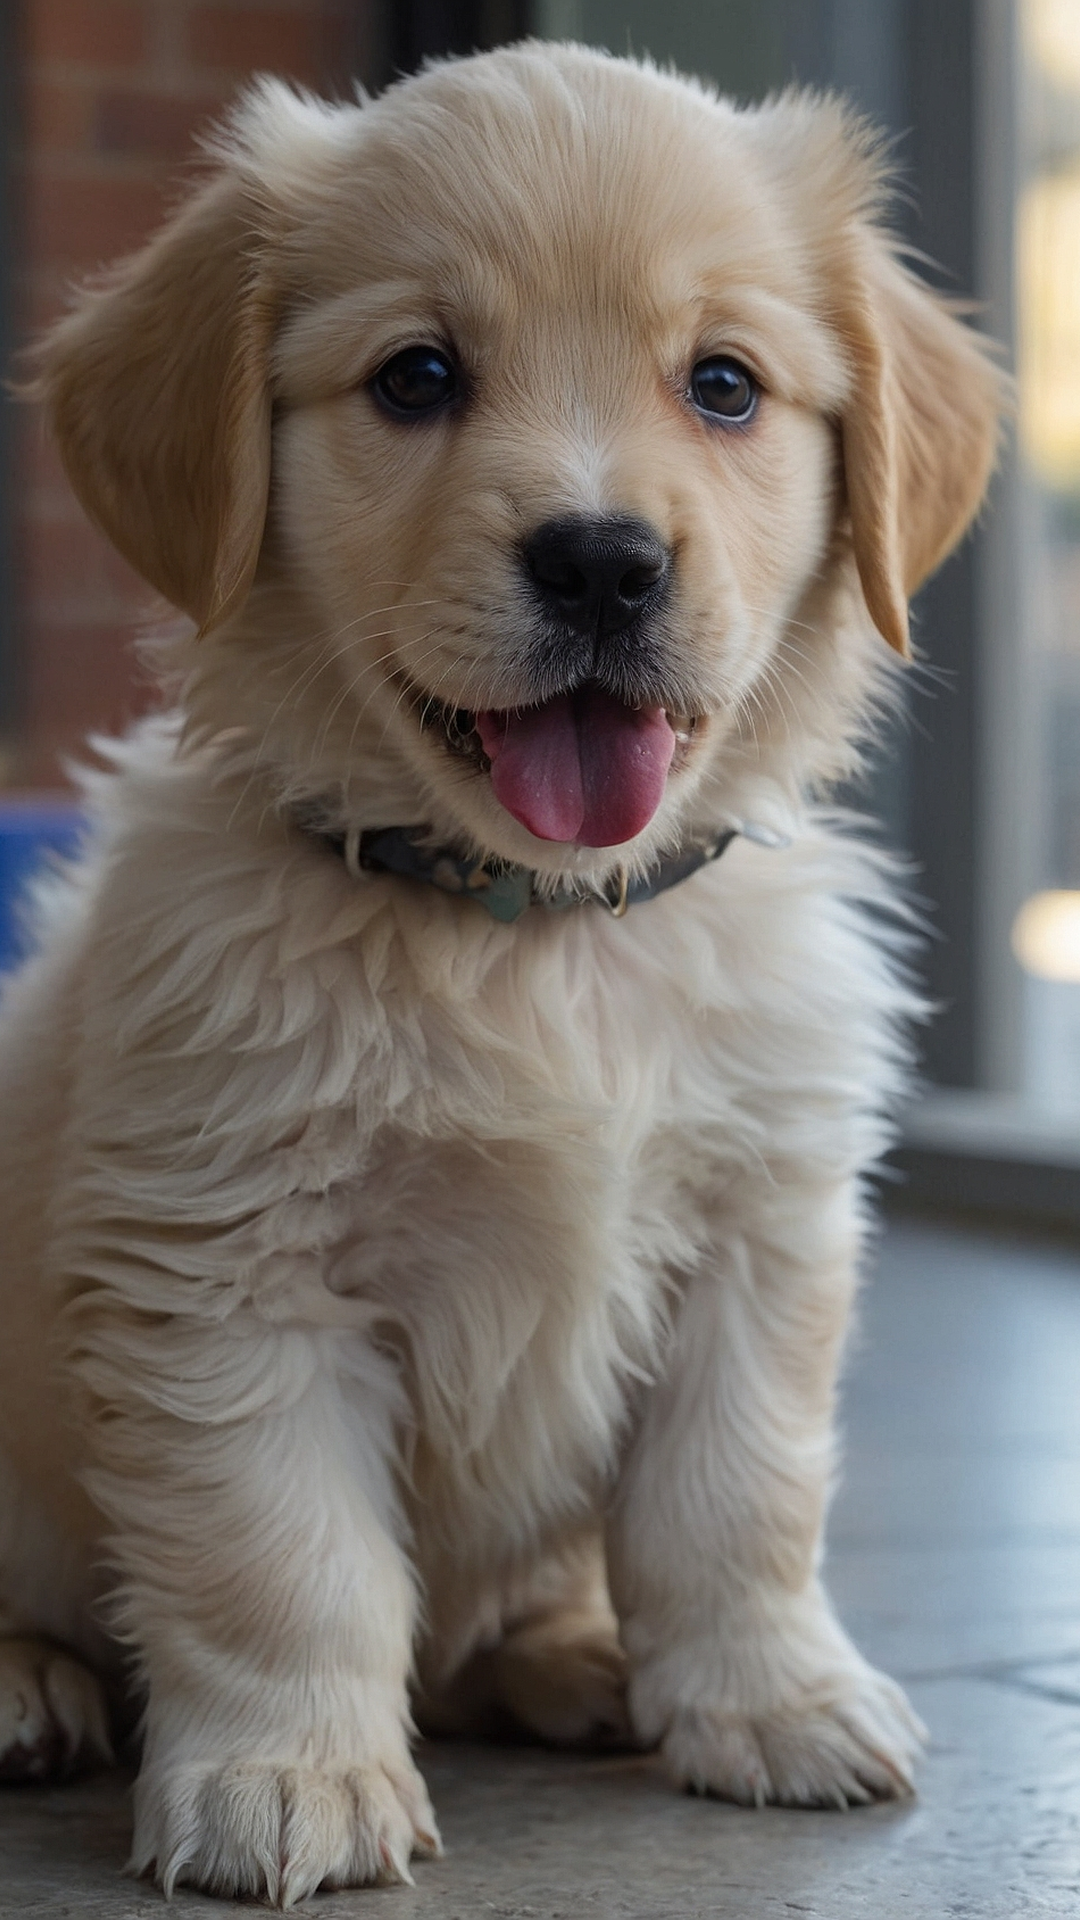 Puppy Perfection: Perfectly Cute and Irresistible